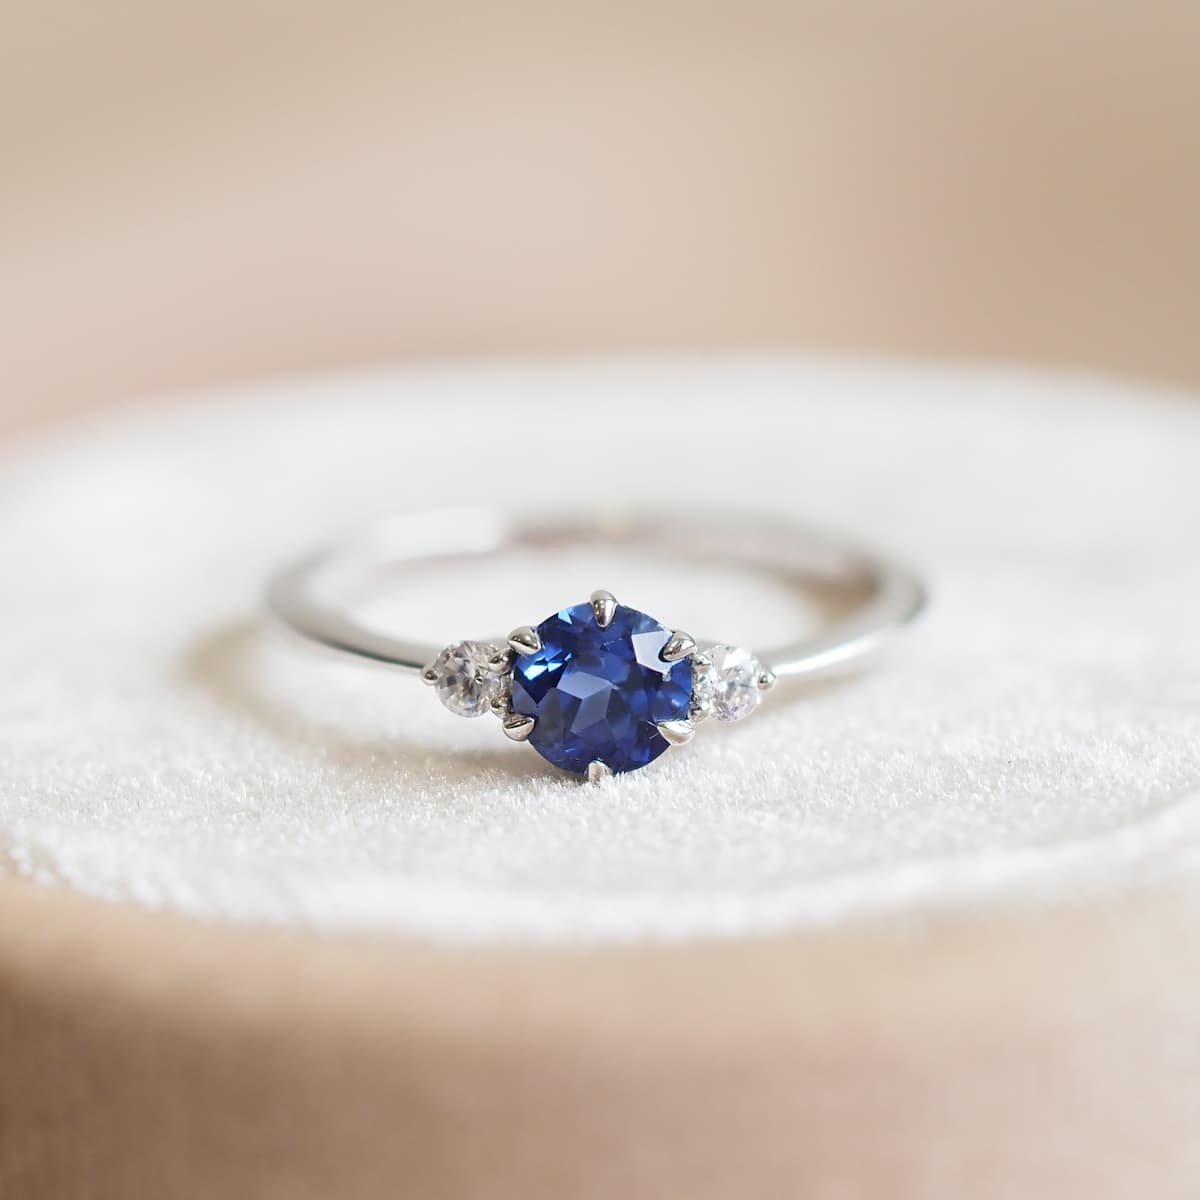 Natalie Blue Sapphire Ring - Engagement Ring